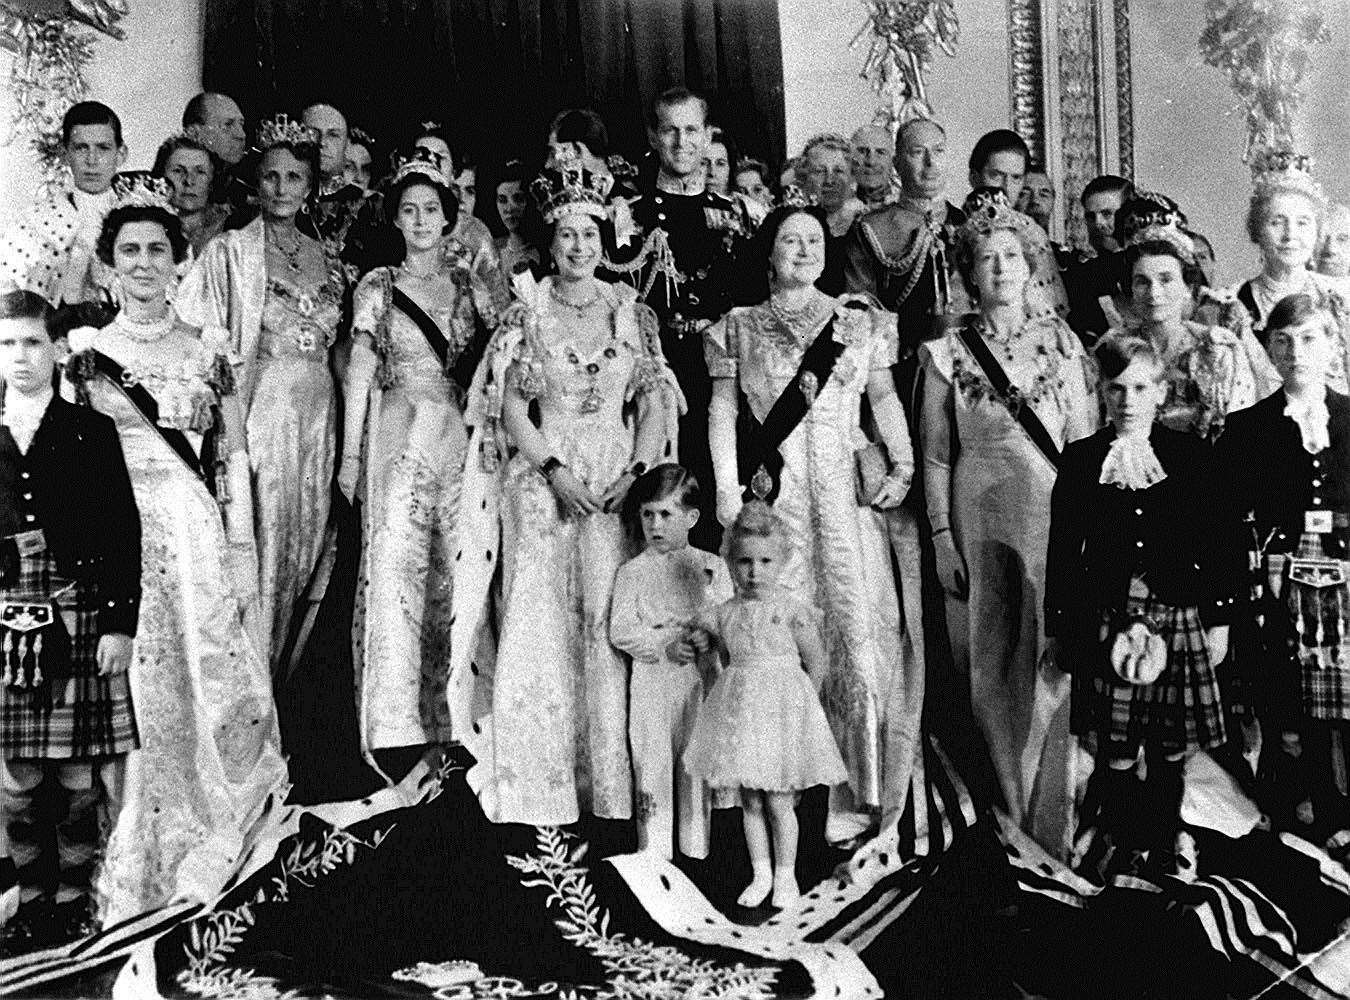 The extra bank holiday means the coronation falls in line with that of the Queen's in 1953. Image: PA.